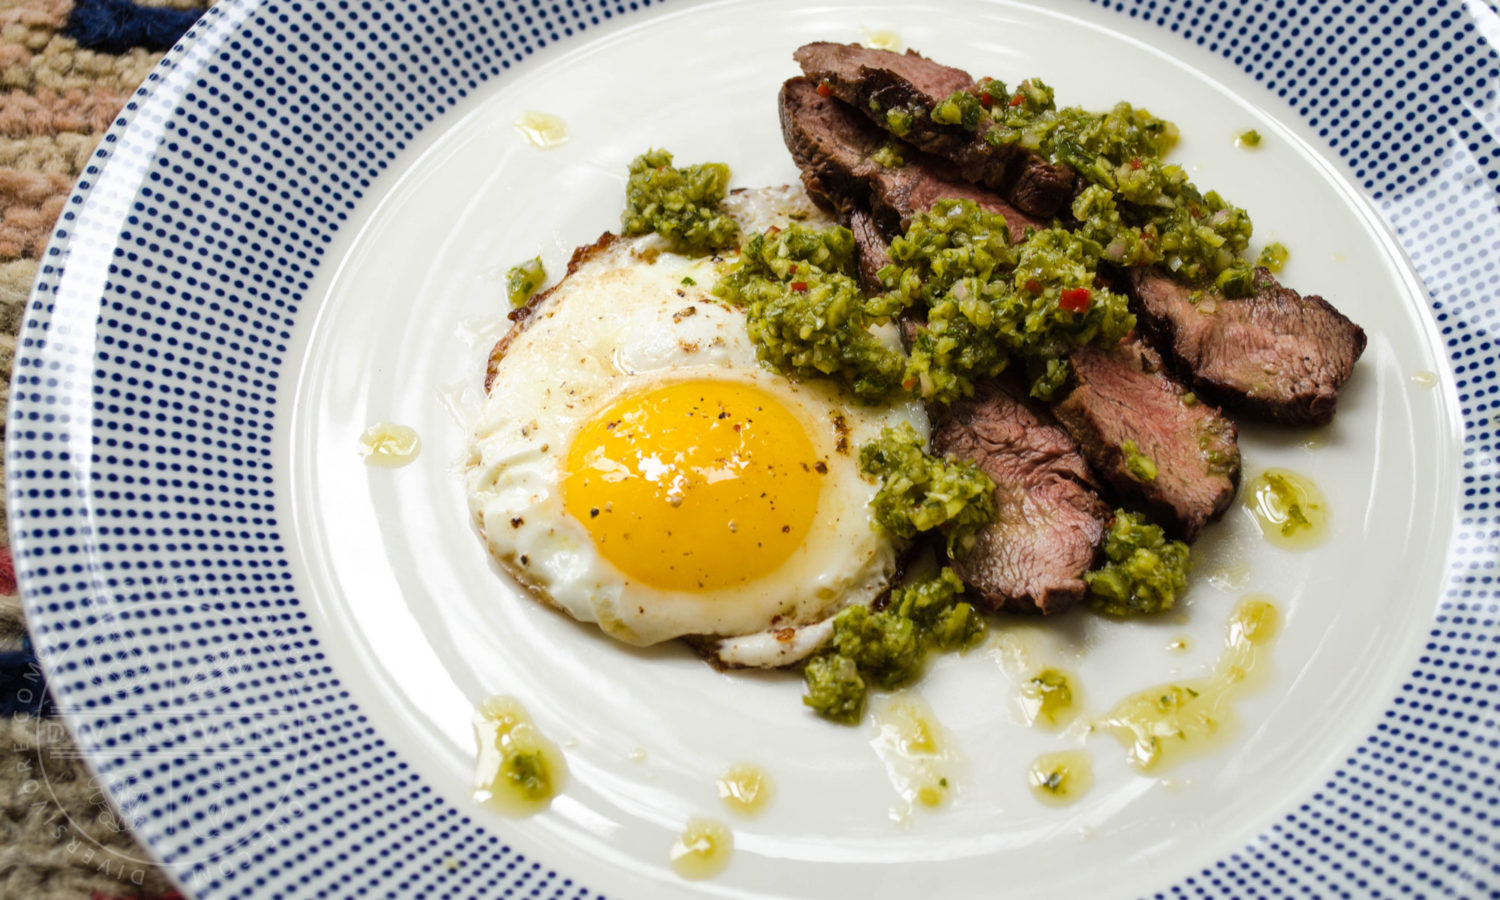 Garlic scape chimichurri served with grilled beef and a fried sunny-side-up egg - Diversivore.com